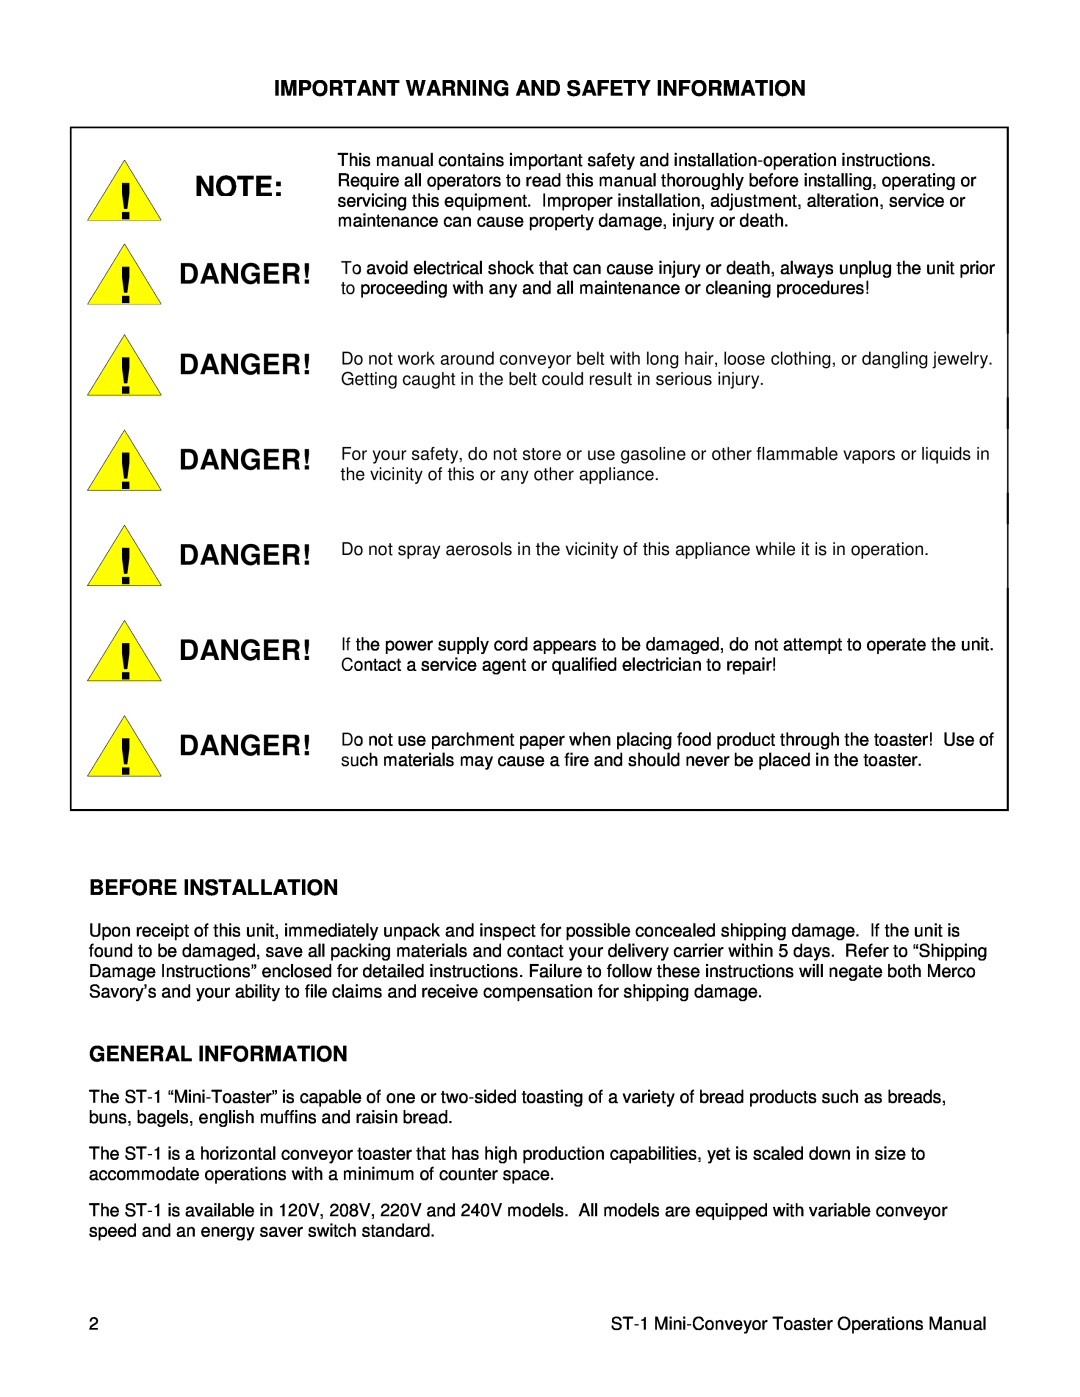 Merco Savory ST-1 manual Important Warning And Safety Information, Before Installation, General Information 